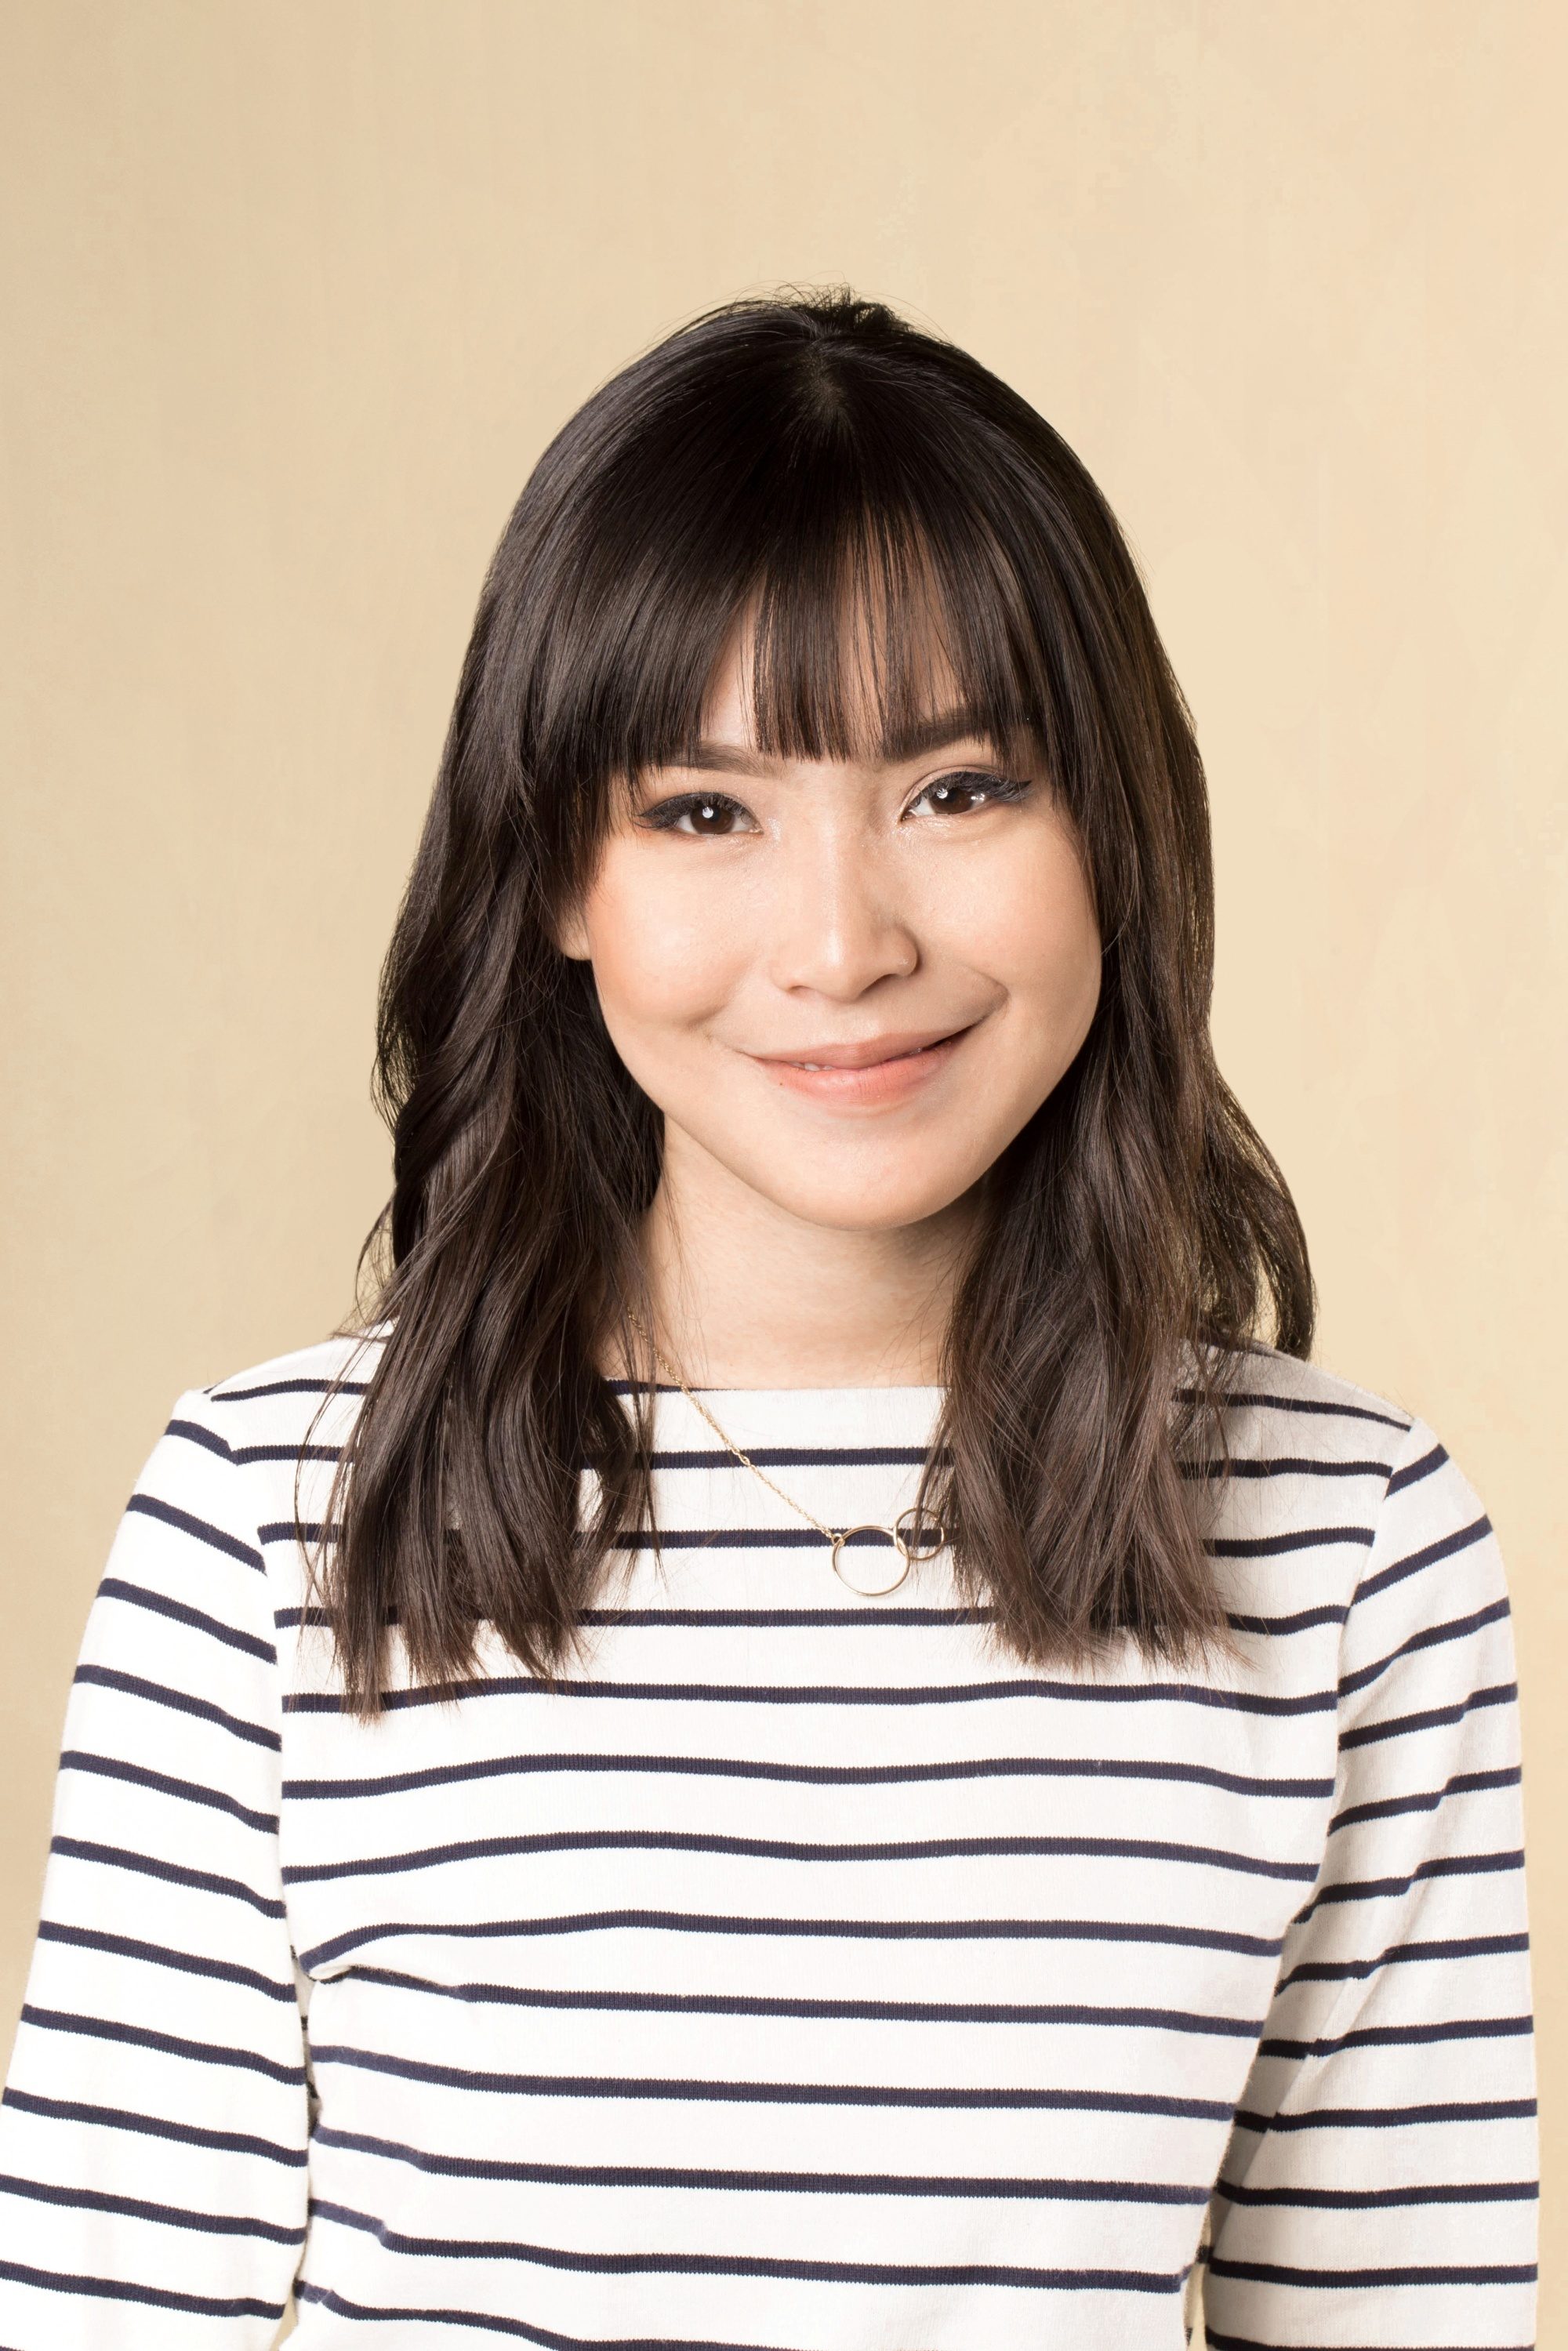 10 Most Popular Korean Haircuts For Women | Preview.ph